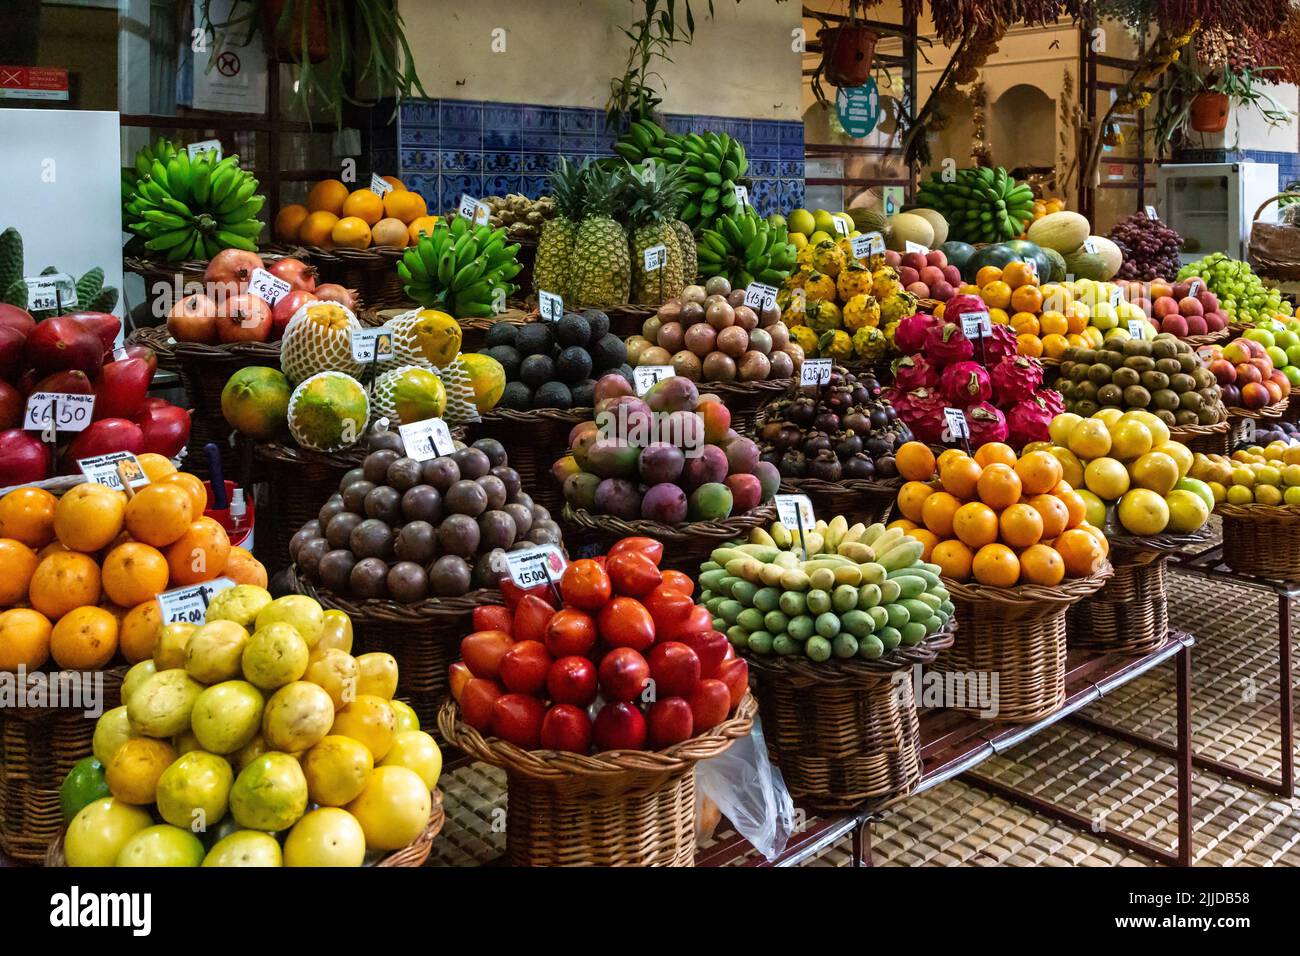 FUNCHAL, PORTUGAL - AUGUST 24, 2021: This is a stall at the Farmers Market teeming with tropical fruits. Stock Photo